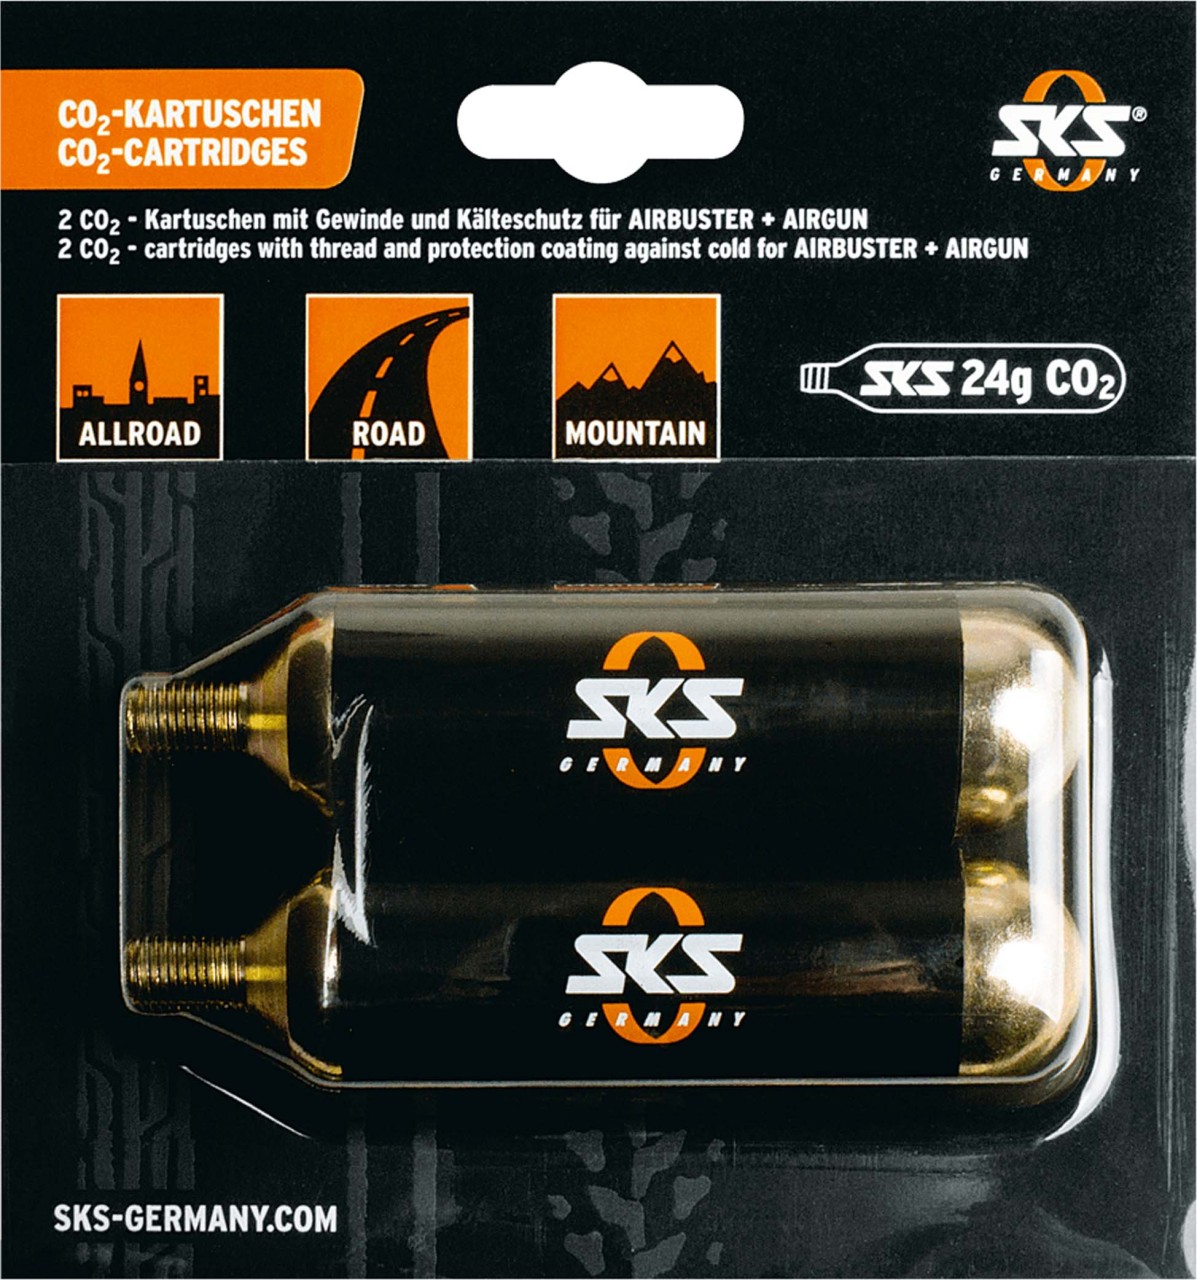 SKS Replacement cartridges (24g) for AIRBUSTER Set of 2